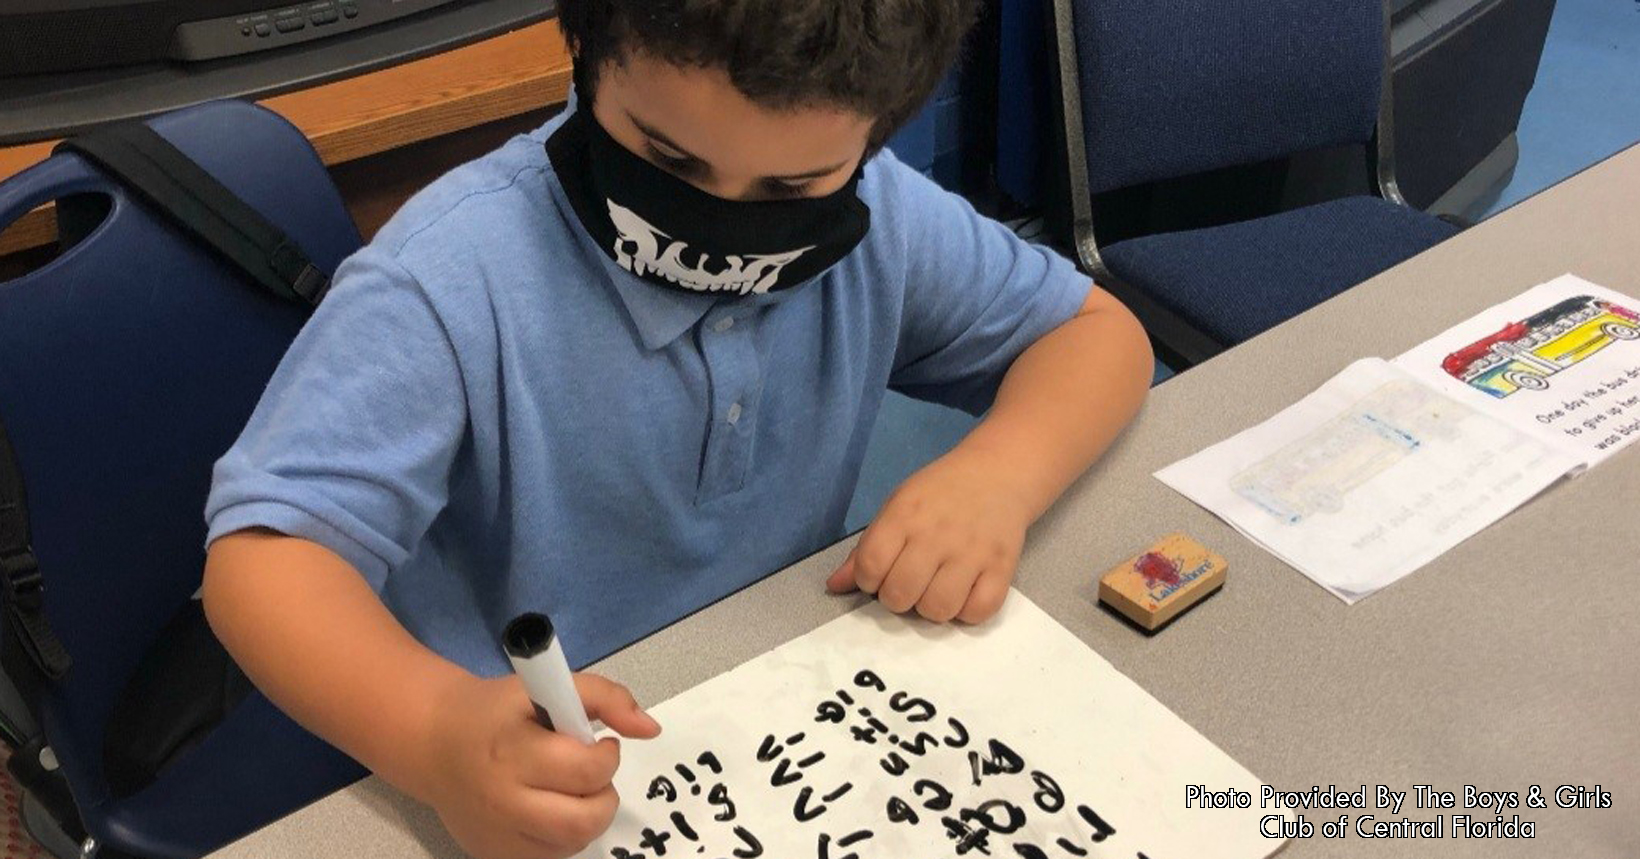 Javen, Club member who attends Idyllwilde Elementary, comes to his Boy's & Girl's Club early and practices his spelling words.